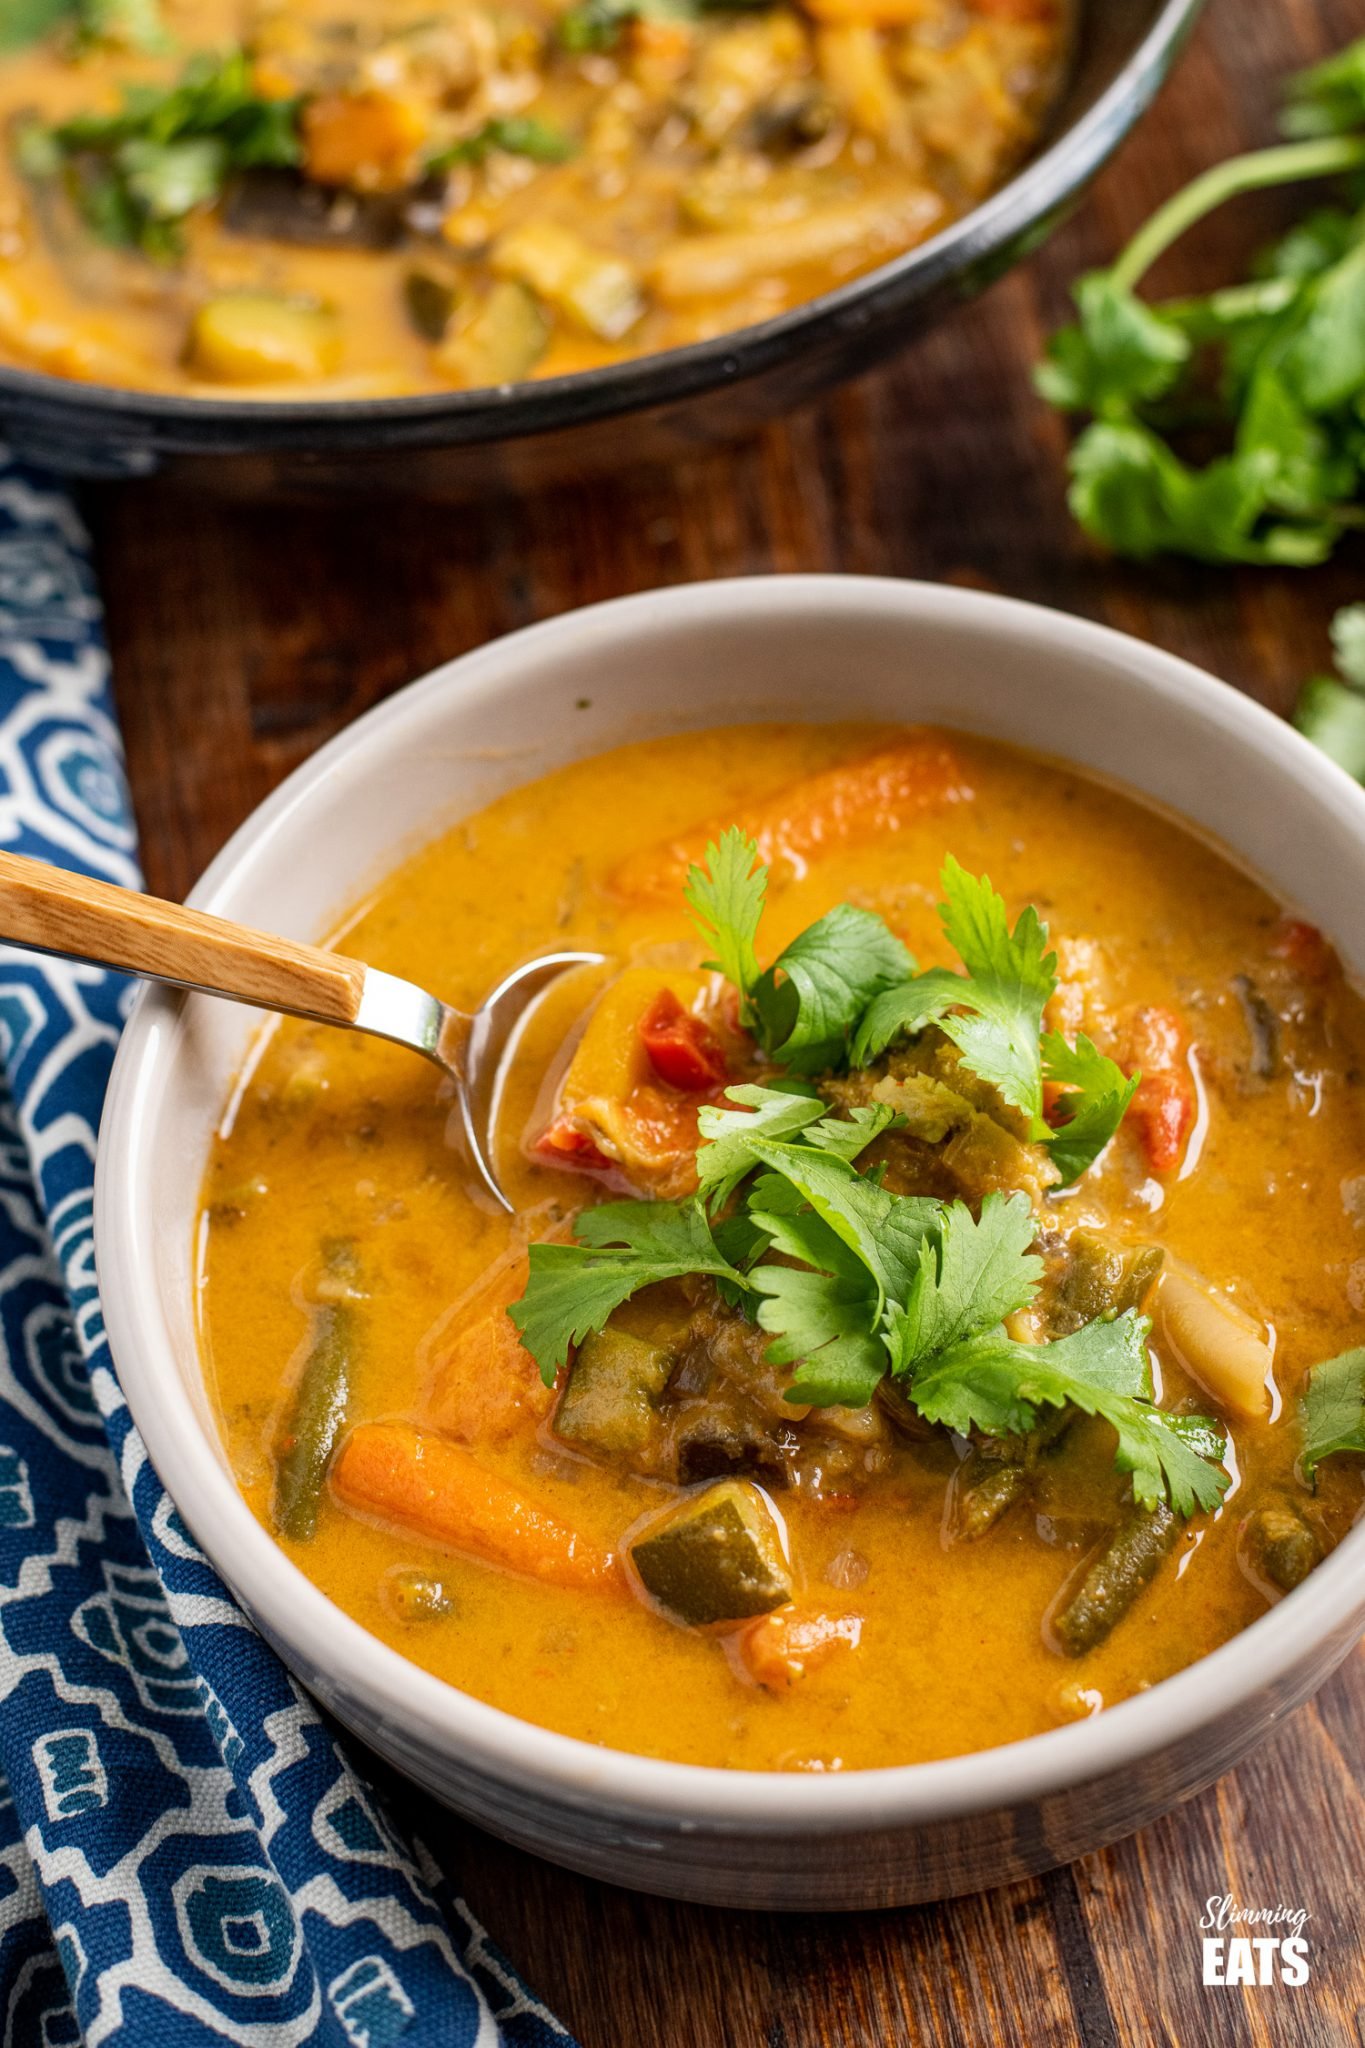 Thai Vegetable Soup topped with coriander in a light grey bowl